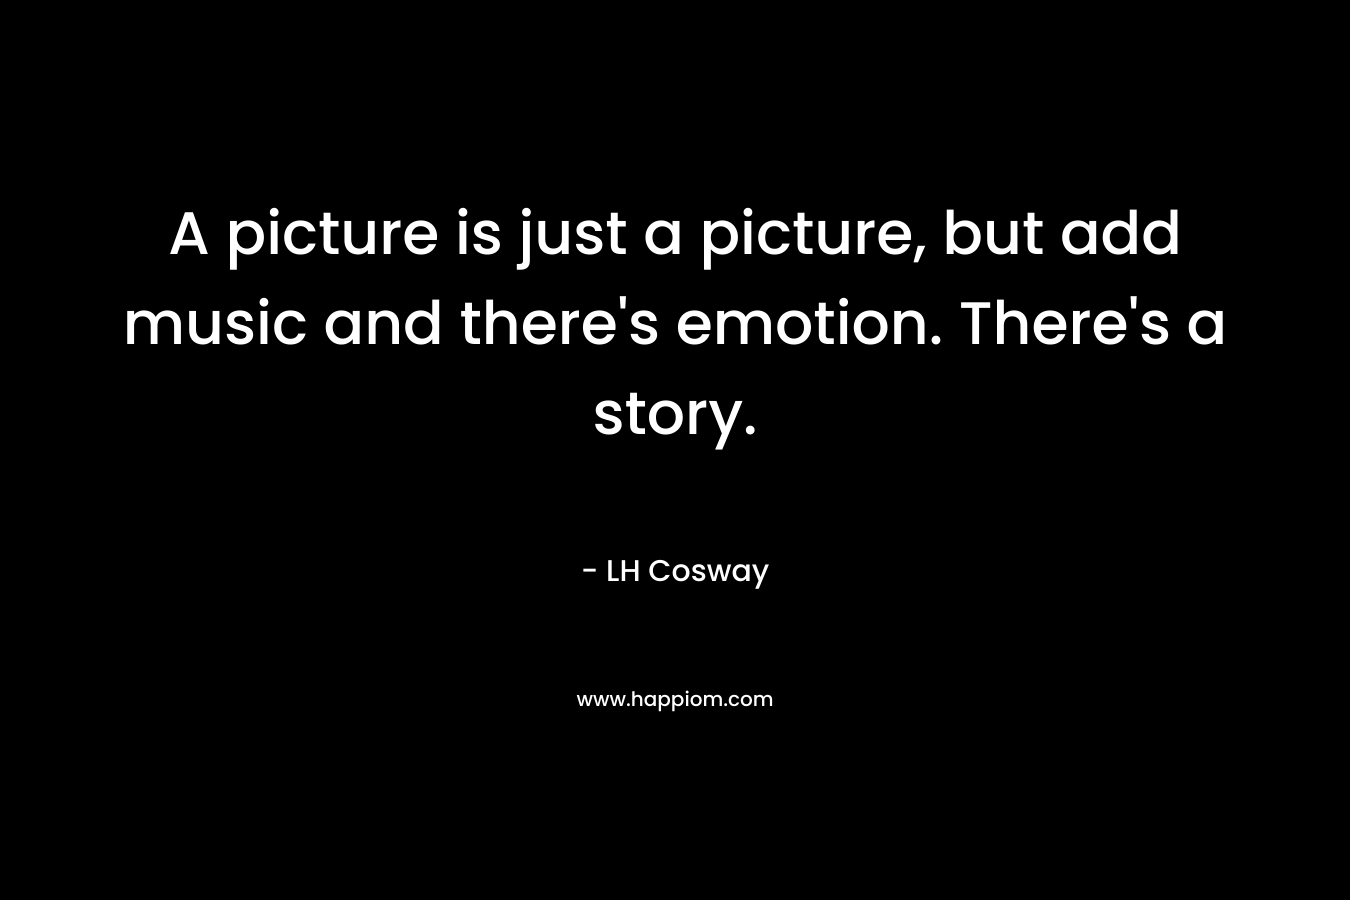 A picture is just a picture, but add music and there's emotion. There's a story.